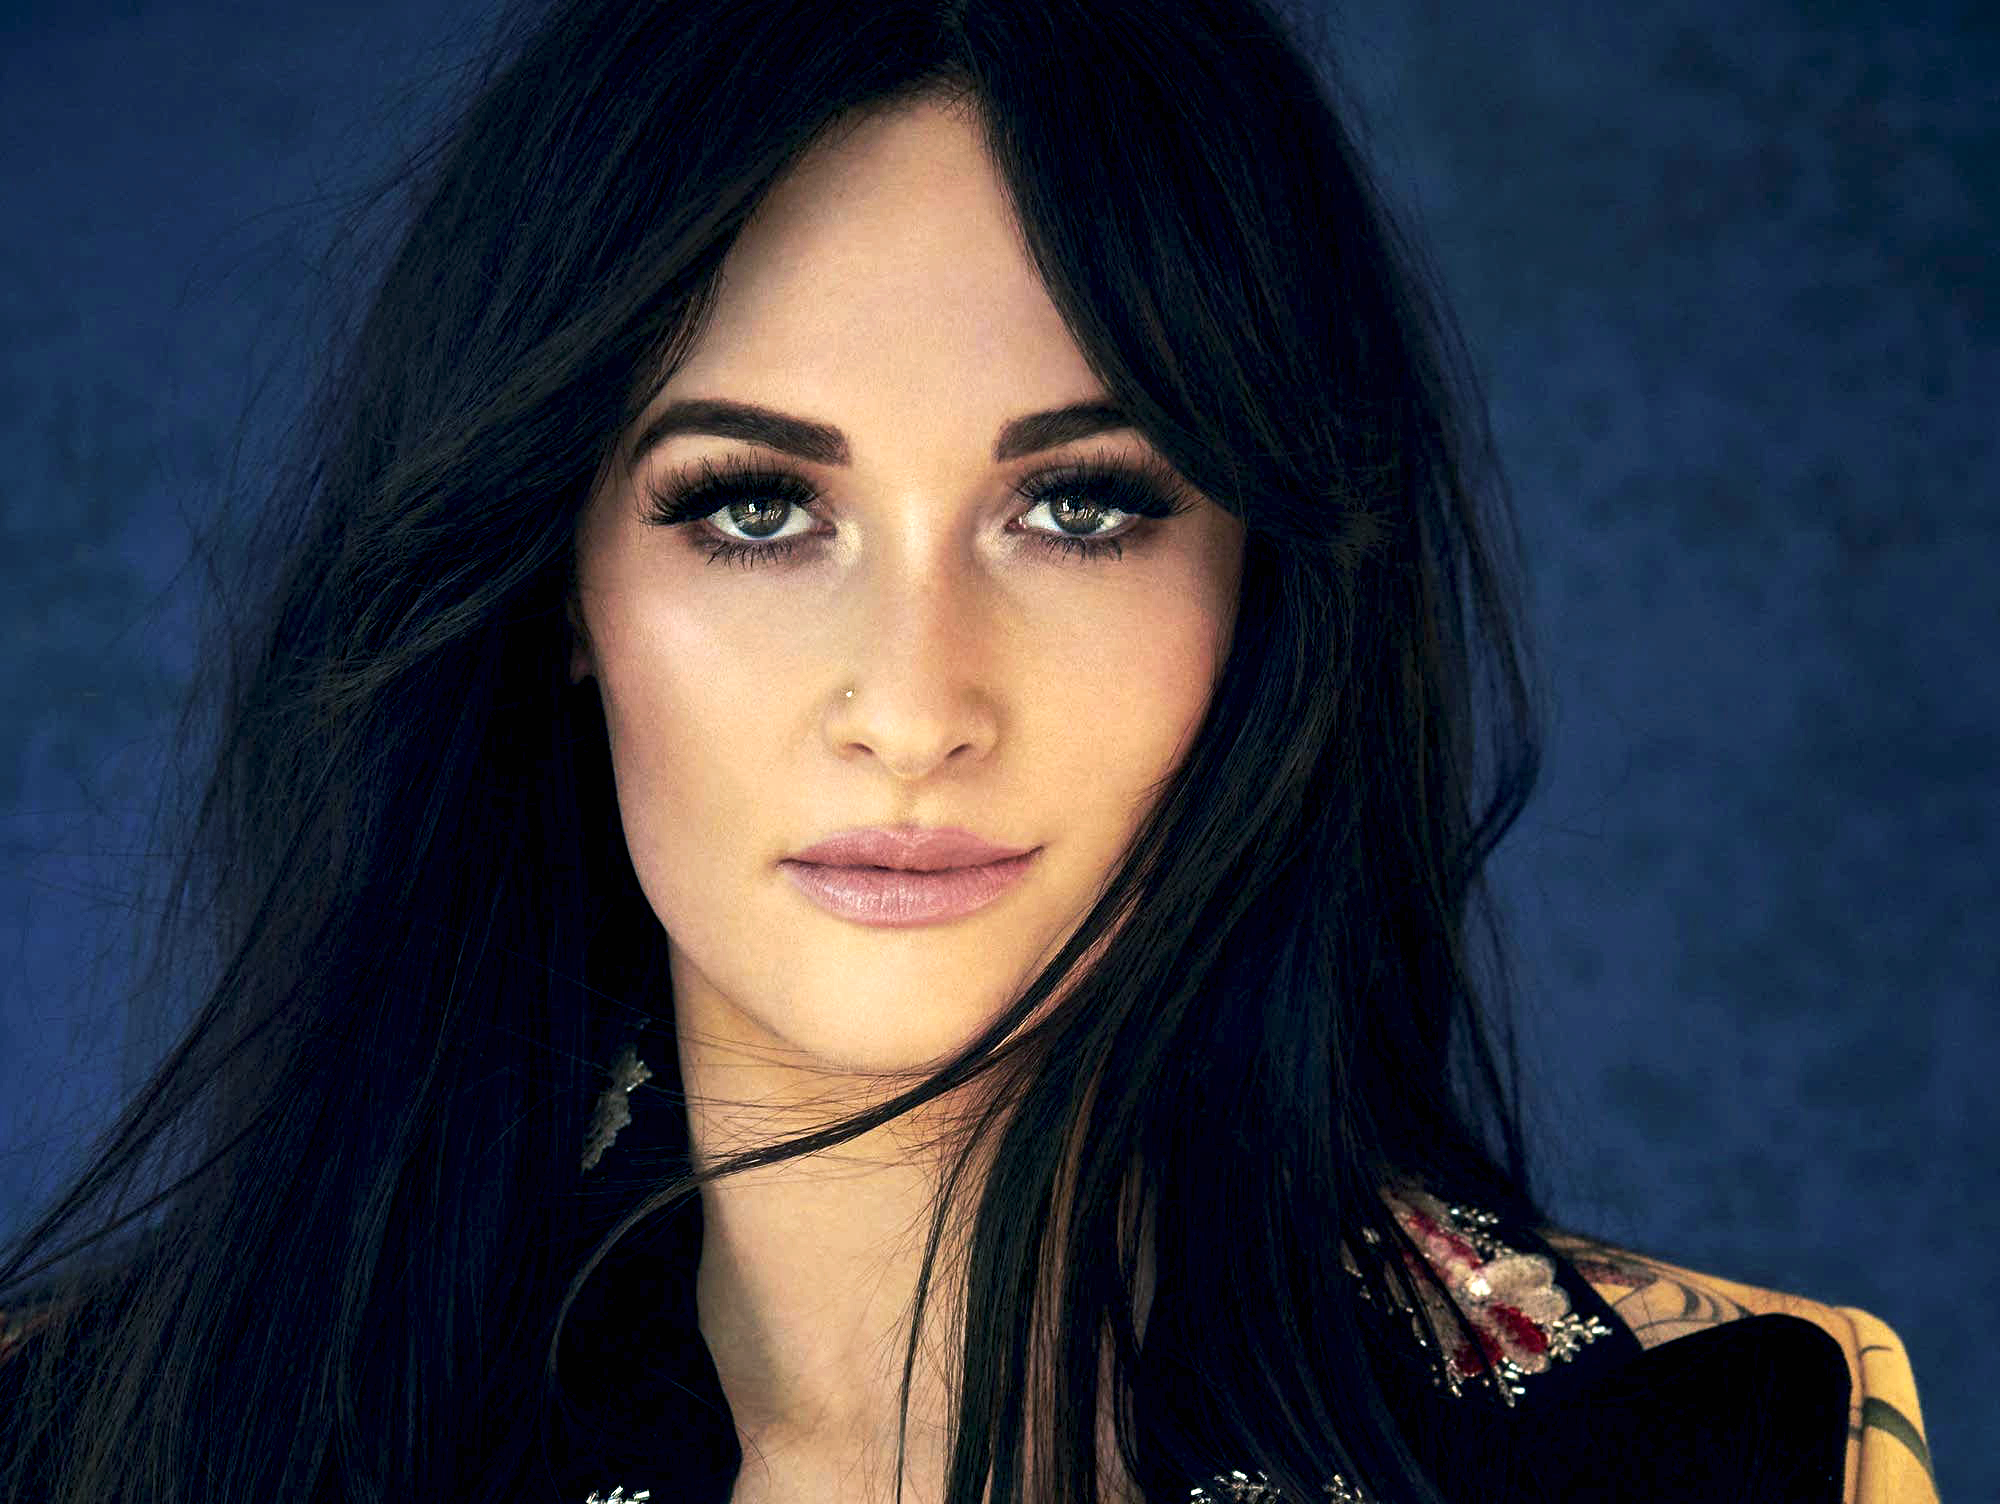 Kacey Musgraves photo 52 of 127 pics, wallpaper - photo #1071538 - ThePlace...